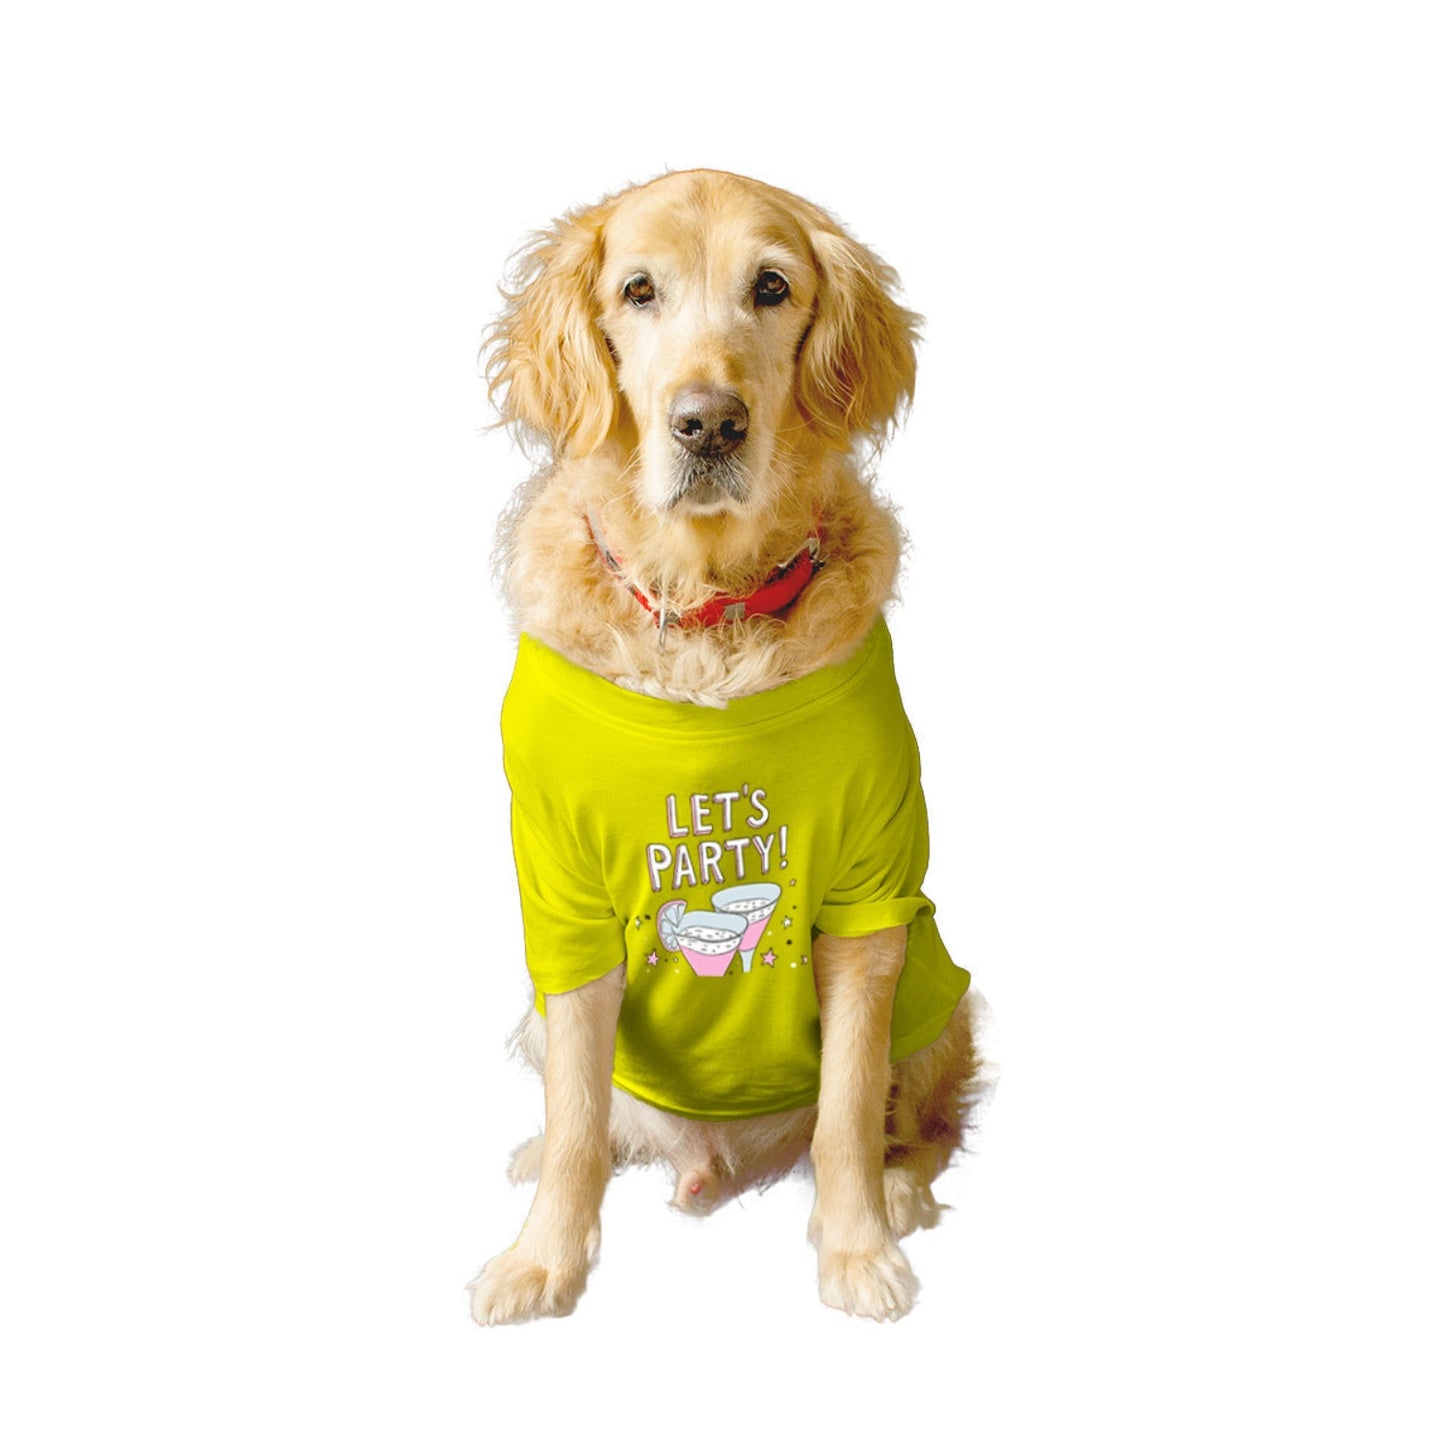 Ruse XX-Small (Chihuahuas, Papillons) / Yellow Ruse Basic Crew Neck "Let's Party" Printed Half Sleeves Dog Tee4